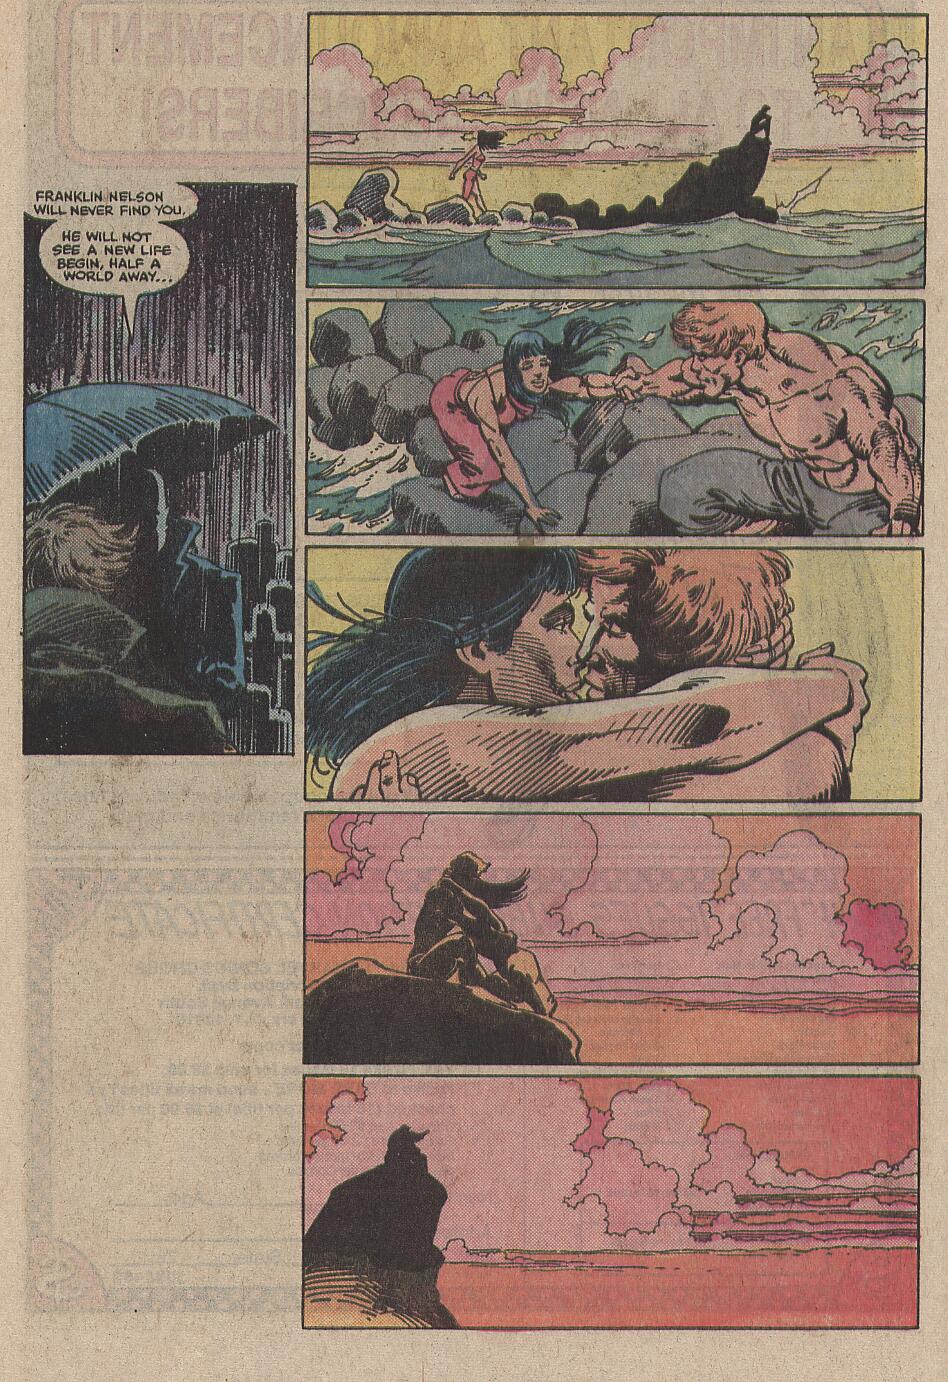 What If? (1977) issue 35 - Elektra had lived - Page 16